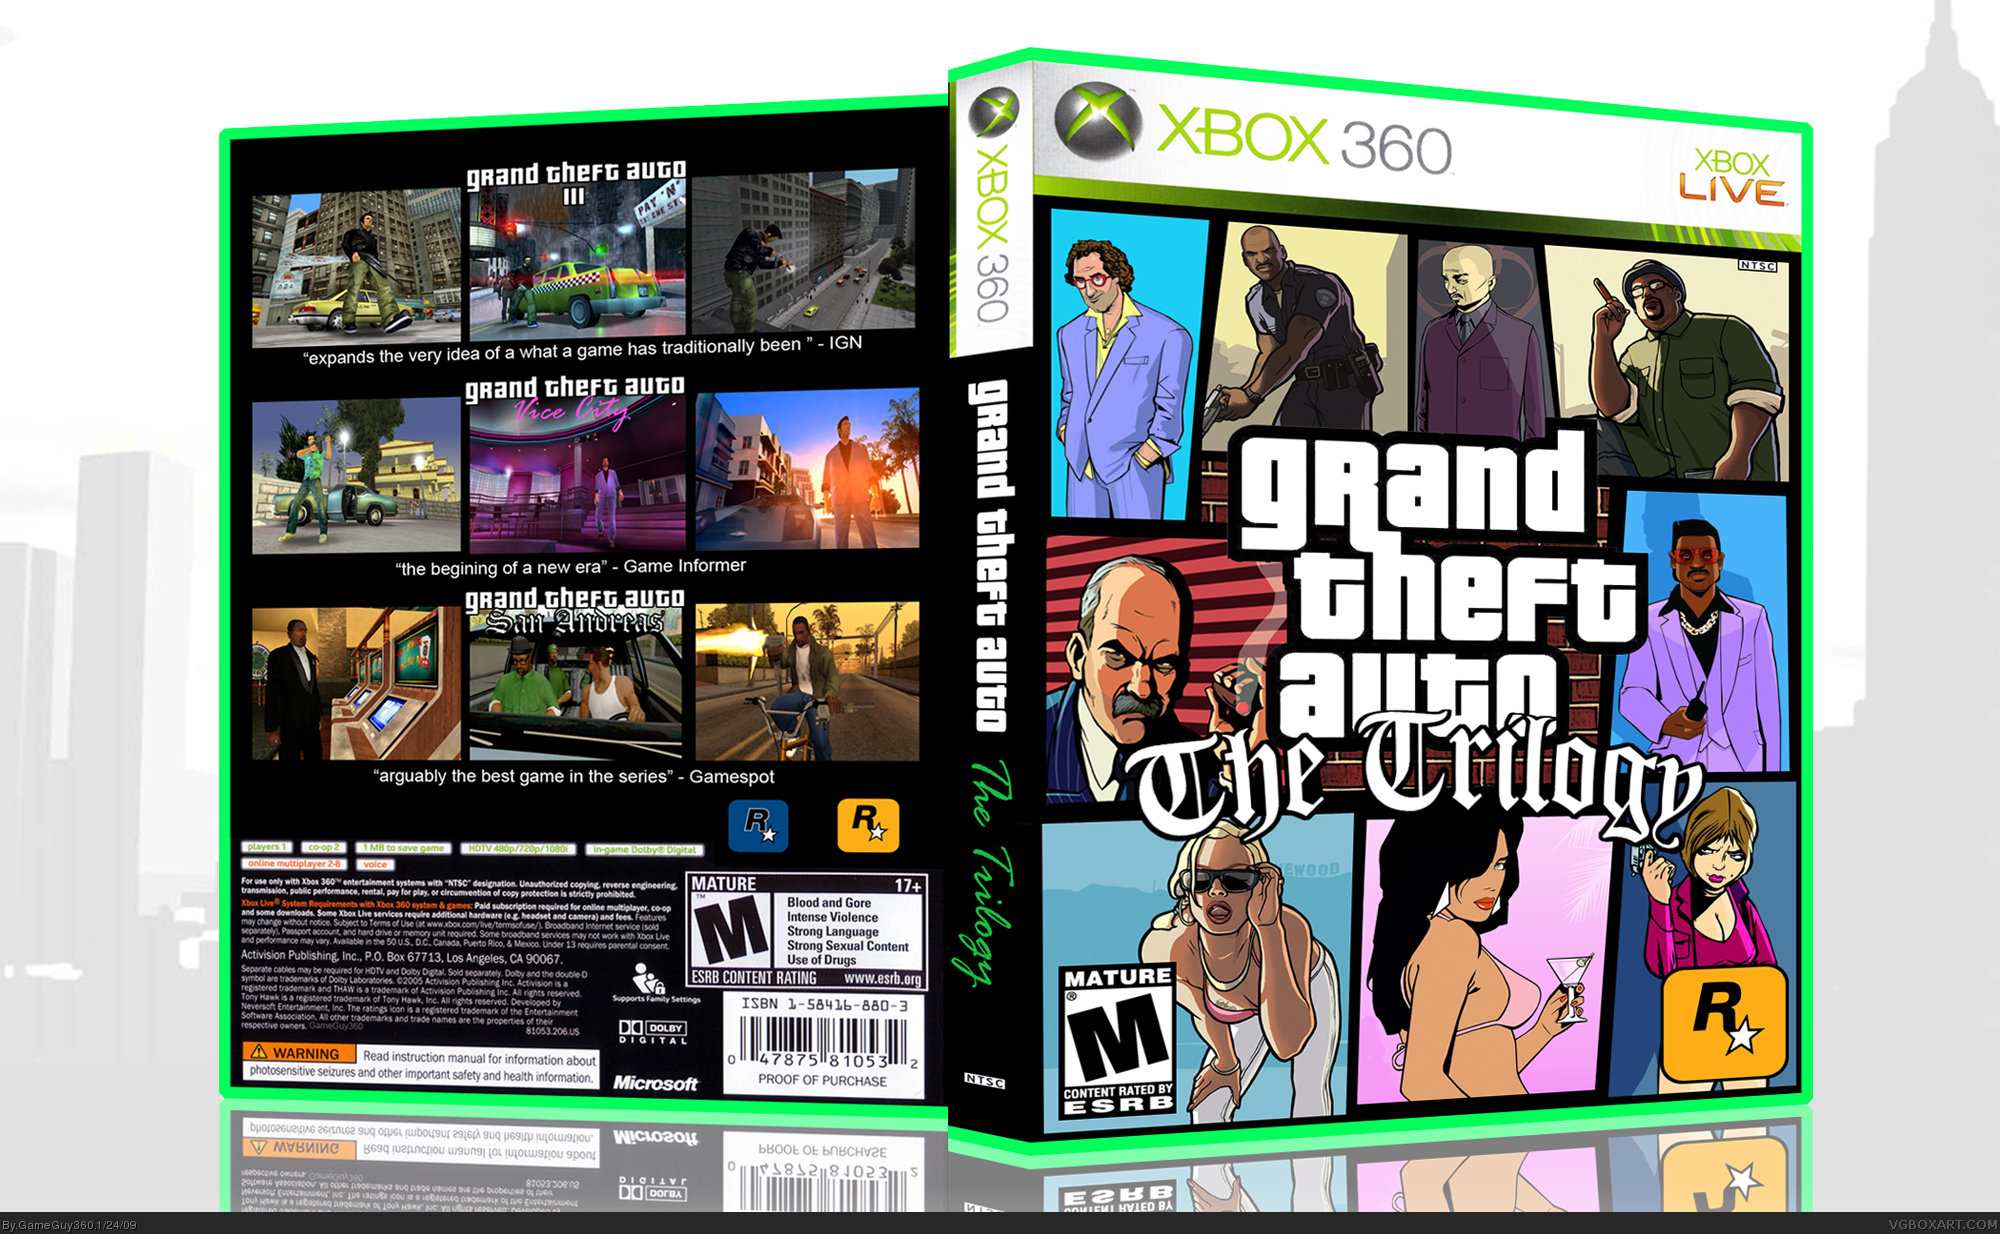 free download gta the trilogy ps5